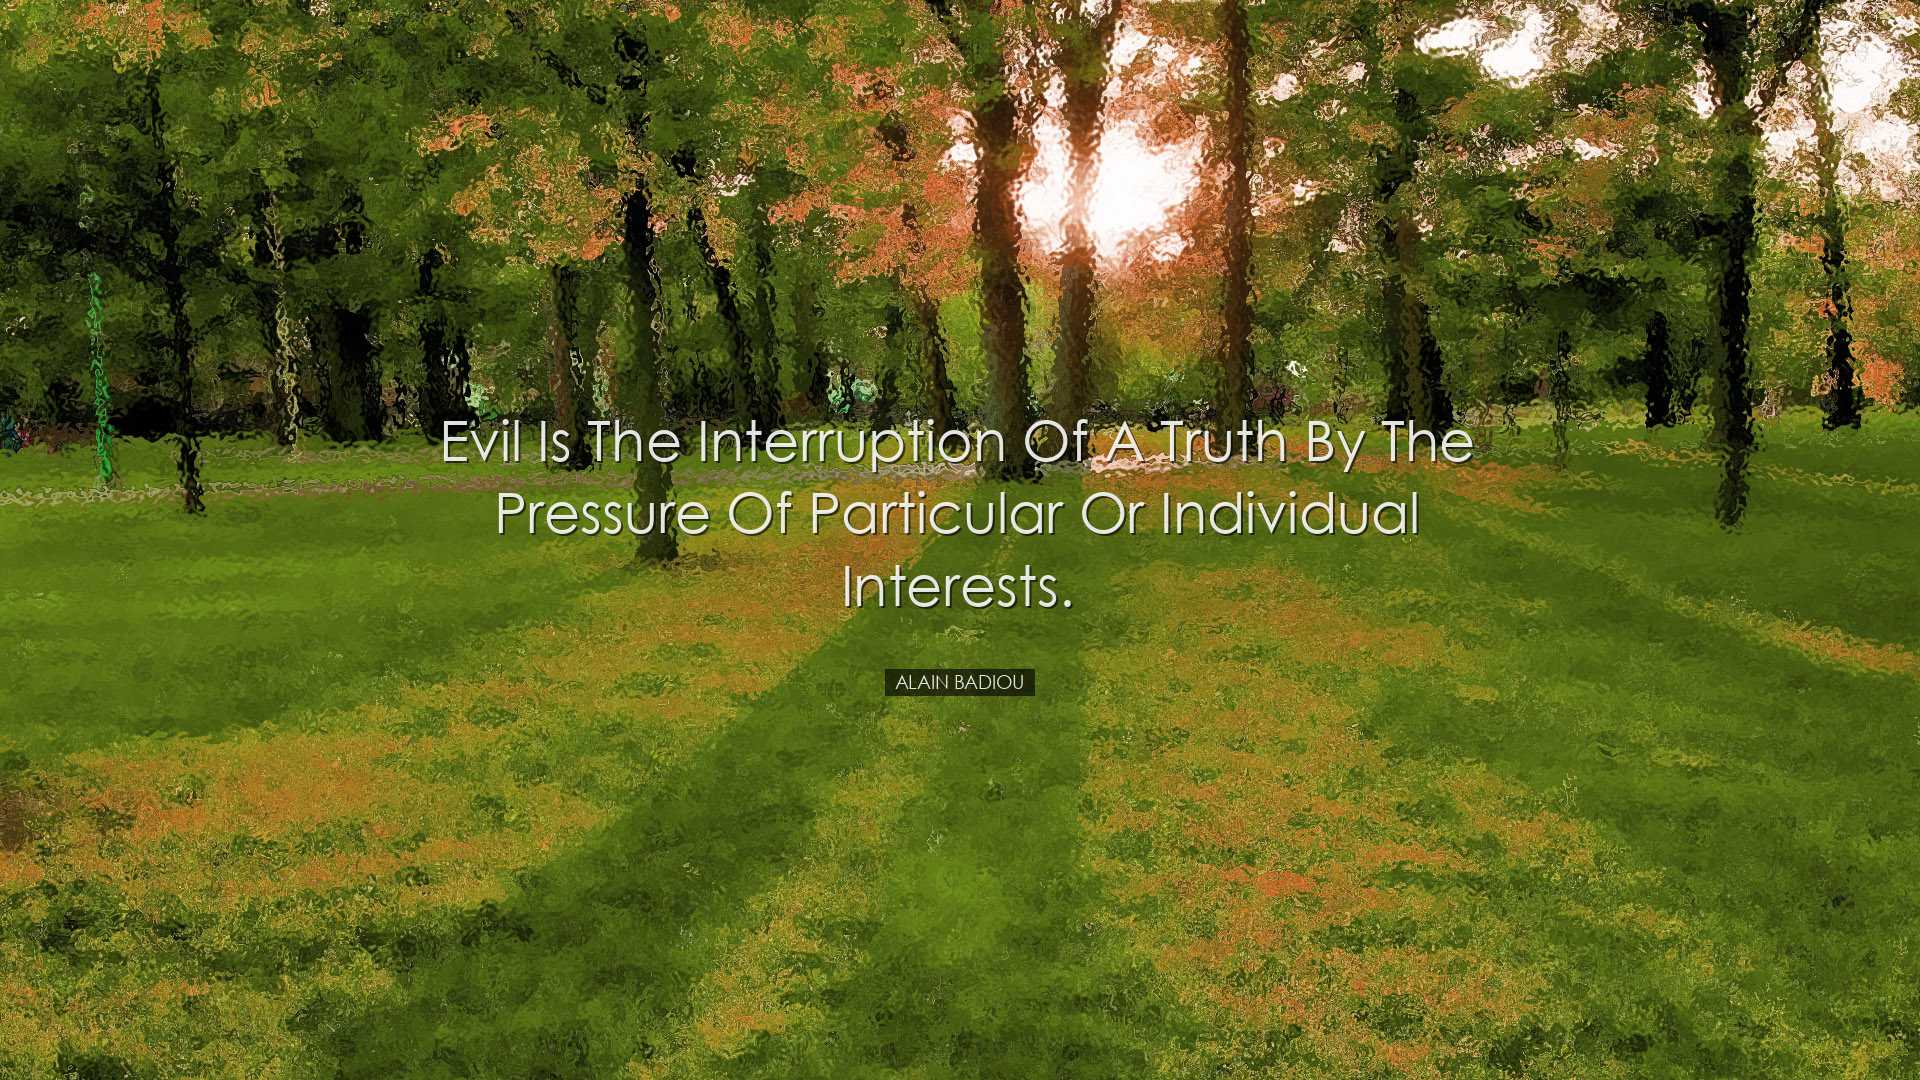 Evil is the interruption of a truth by the pressure of particular